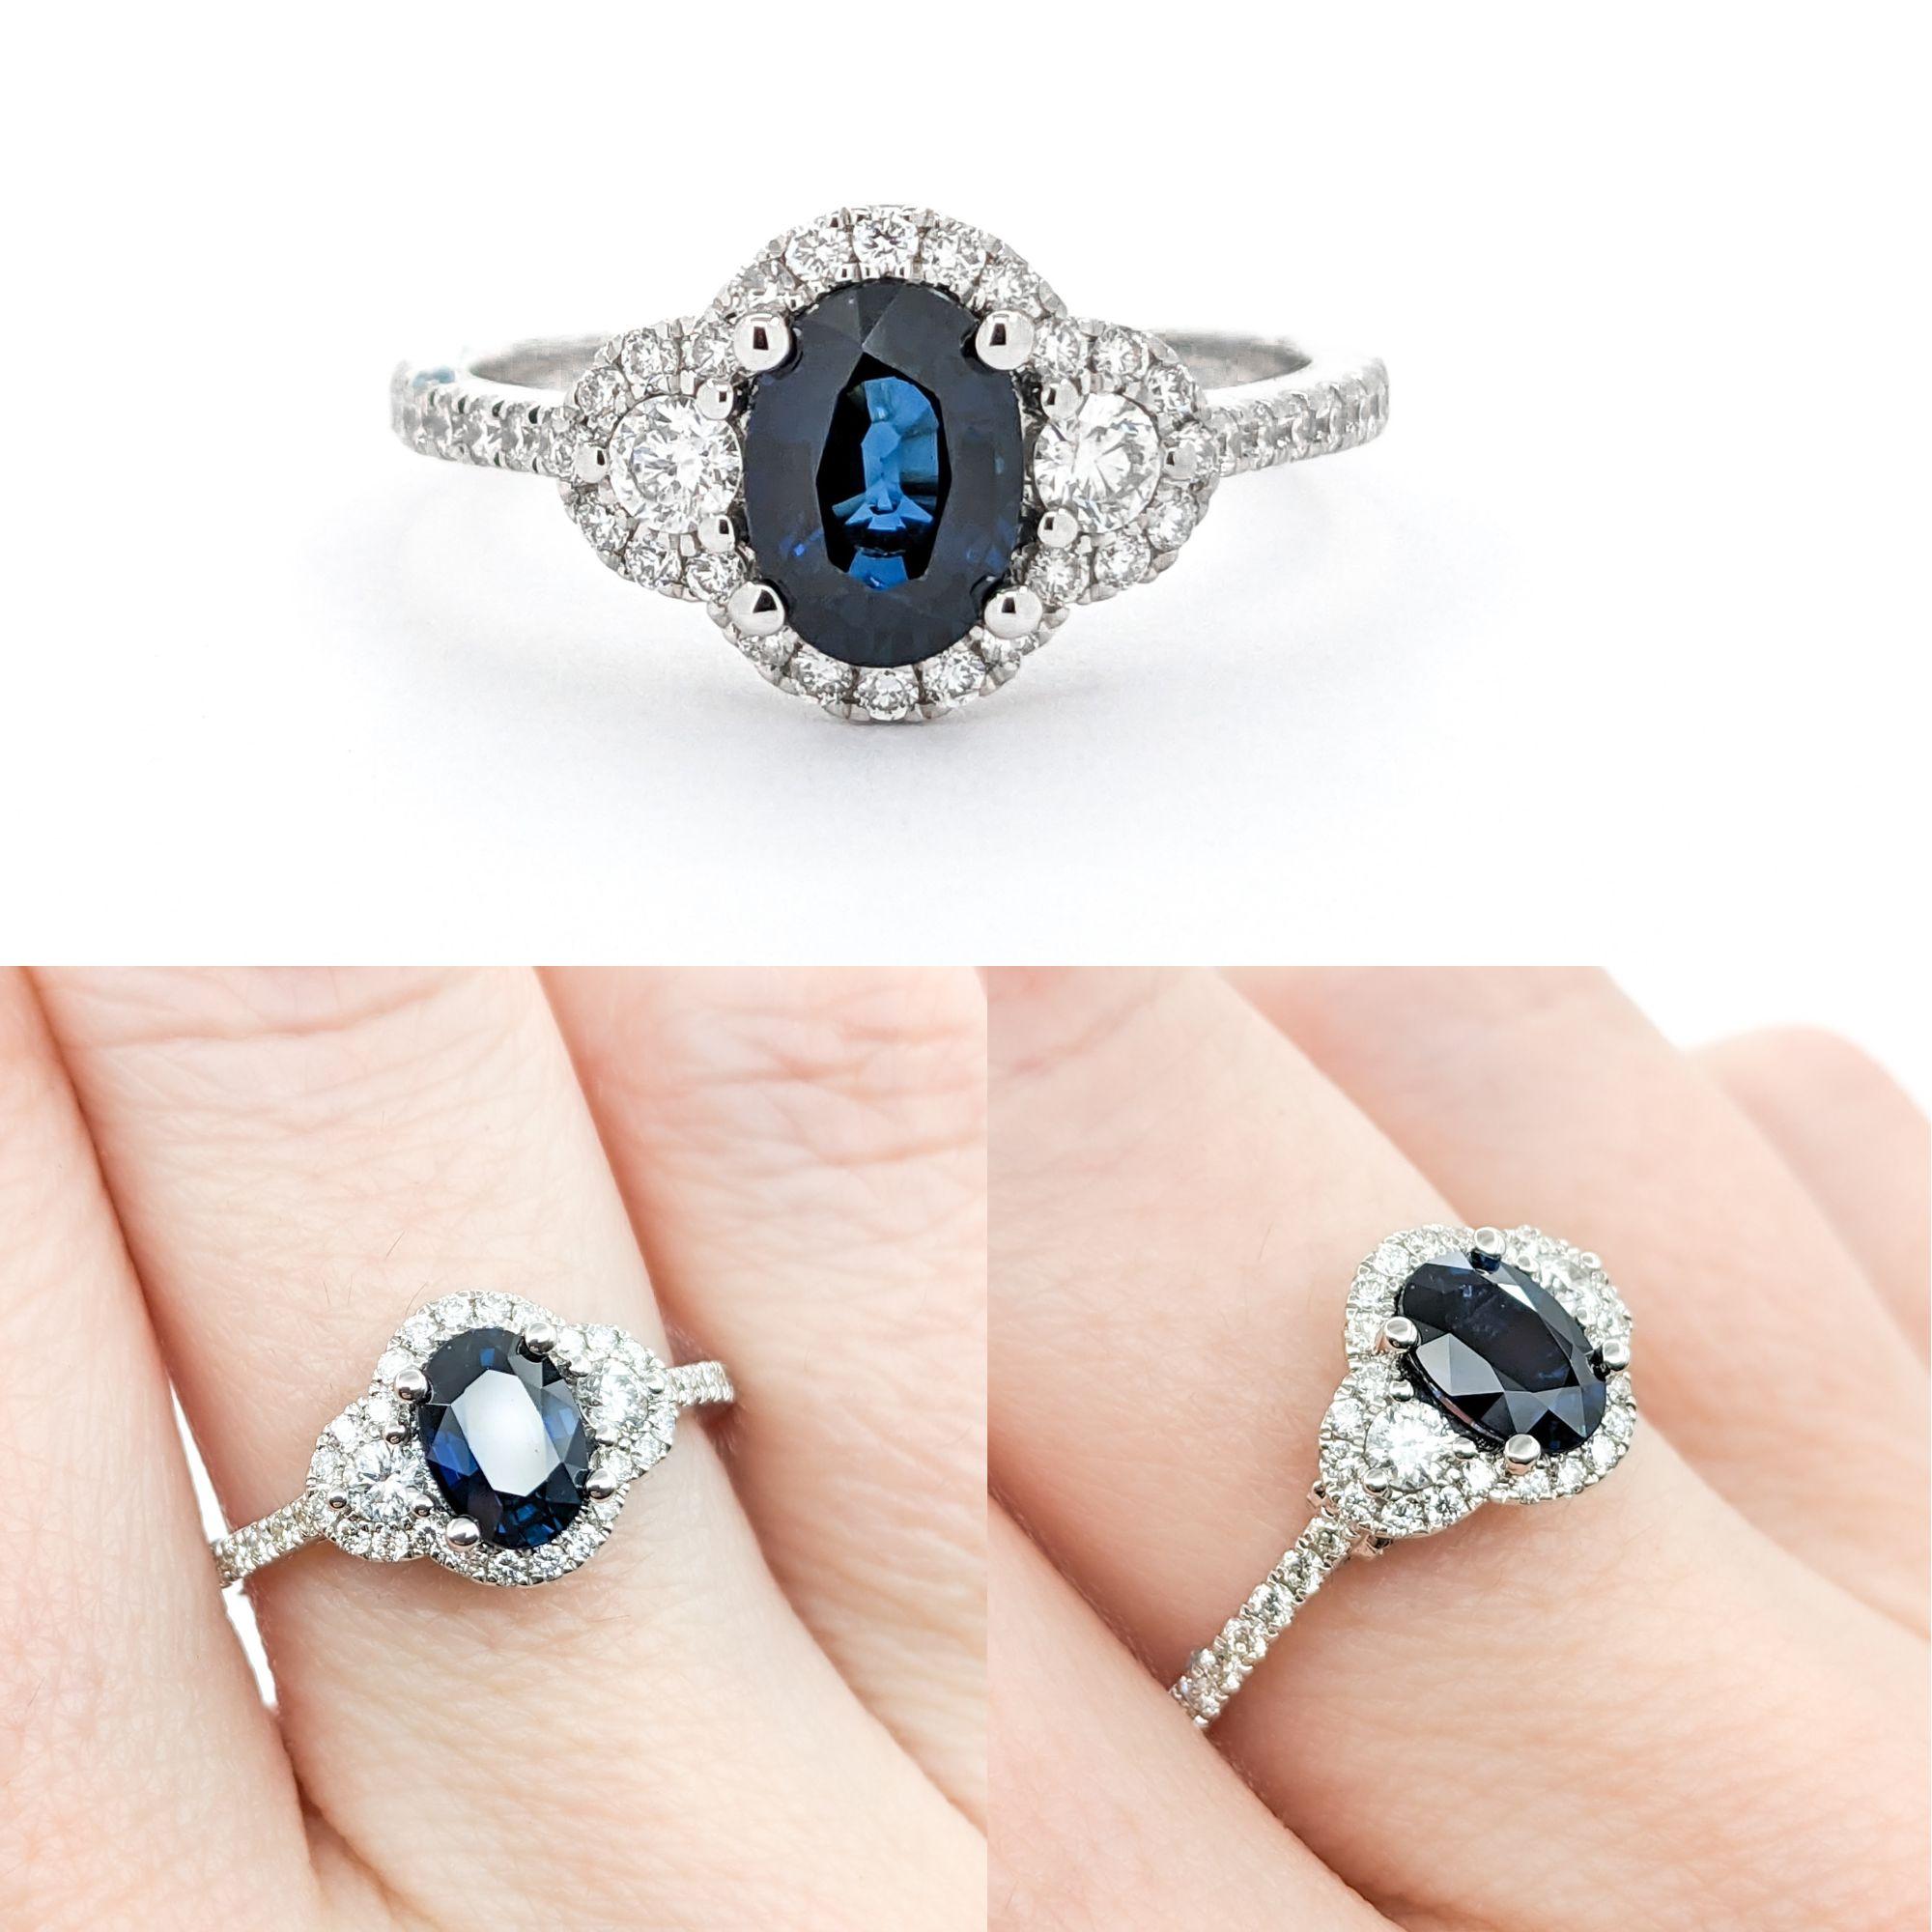 .95ct Blue Sapphire & Diamond Ring In White Gold

Introducing this stunning ring crafted in 14kt white gold. It features a .95ct blue sapphire centerpiece beautifully complemented by .42ctw of round diamonds. These diamonds boast SI-I clarity and a